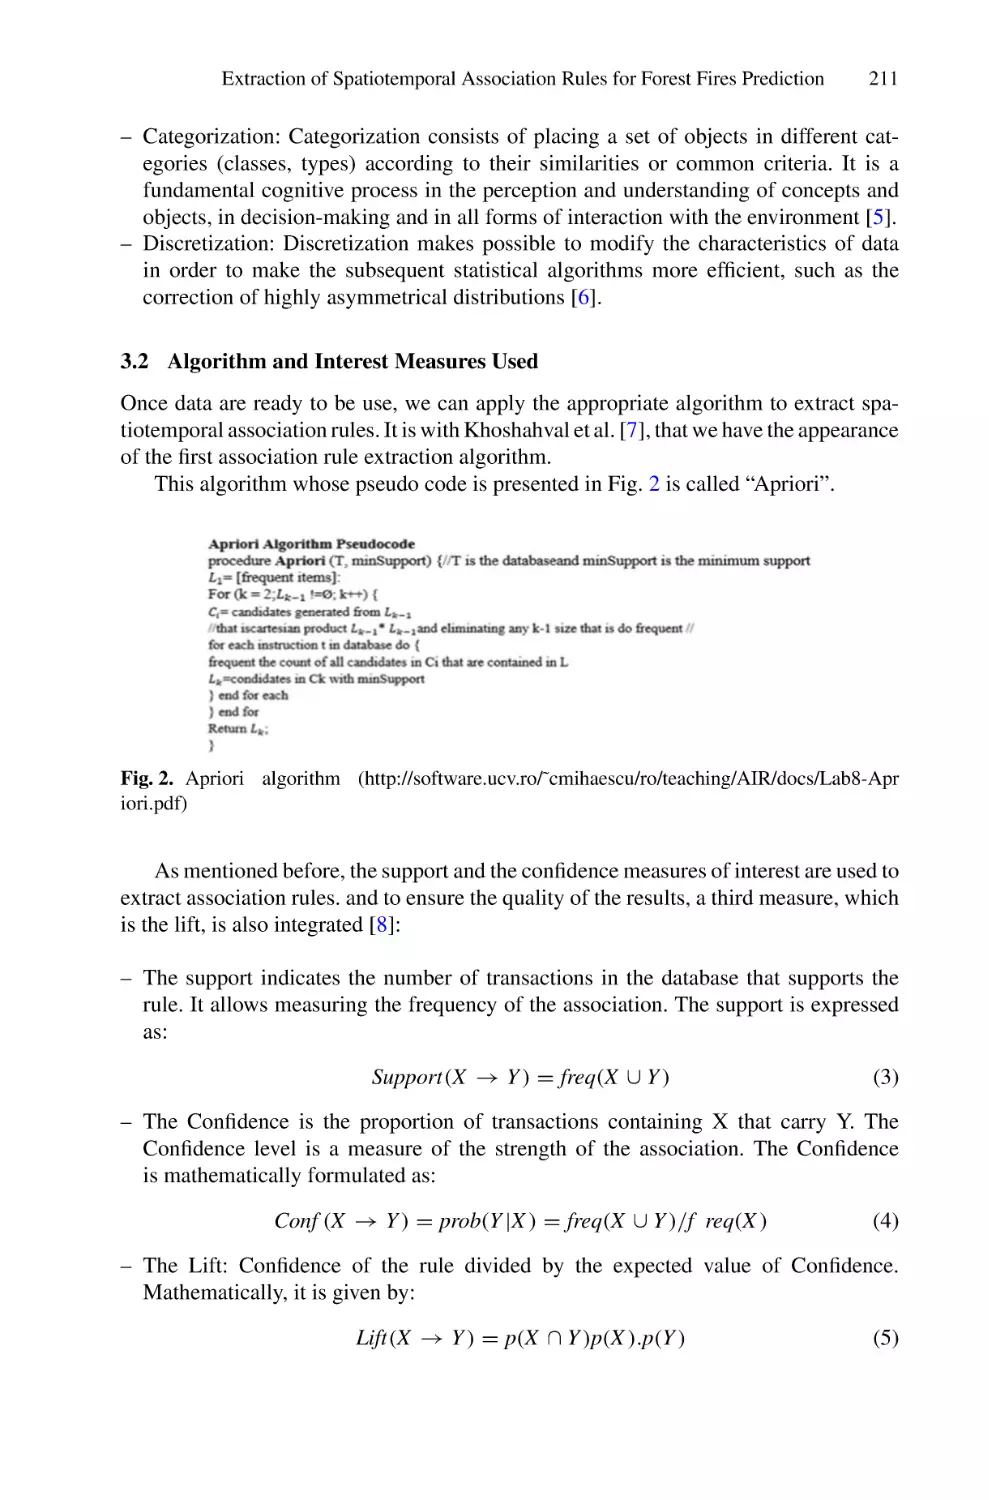 3.2 Algorithm and Interest Measures Used